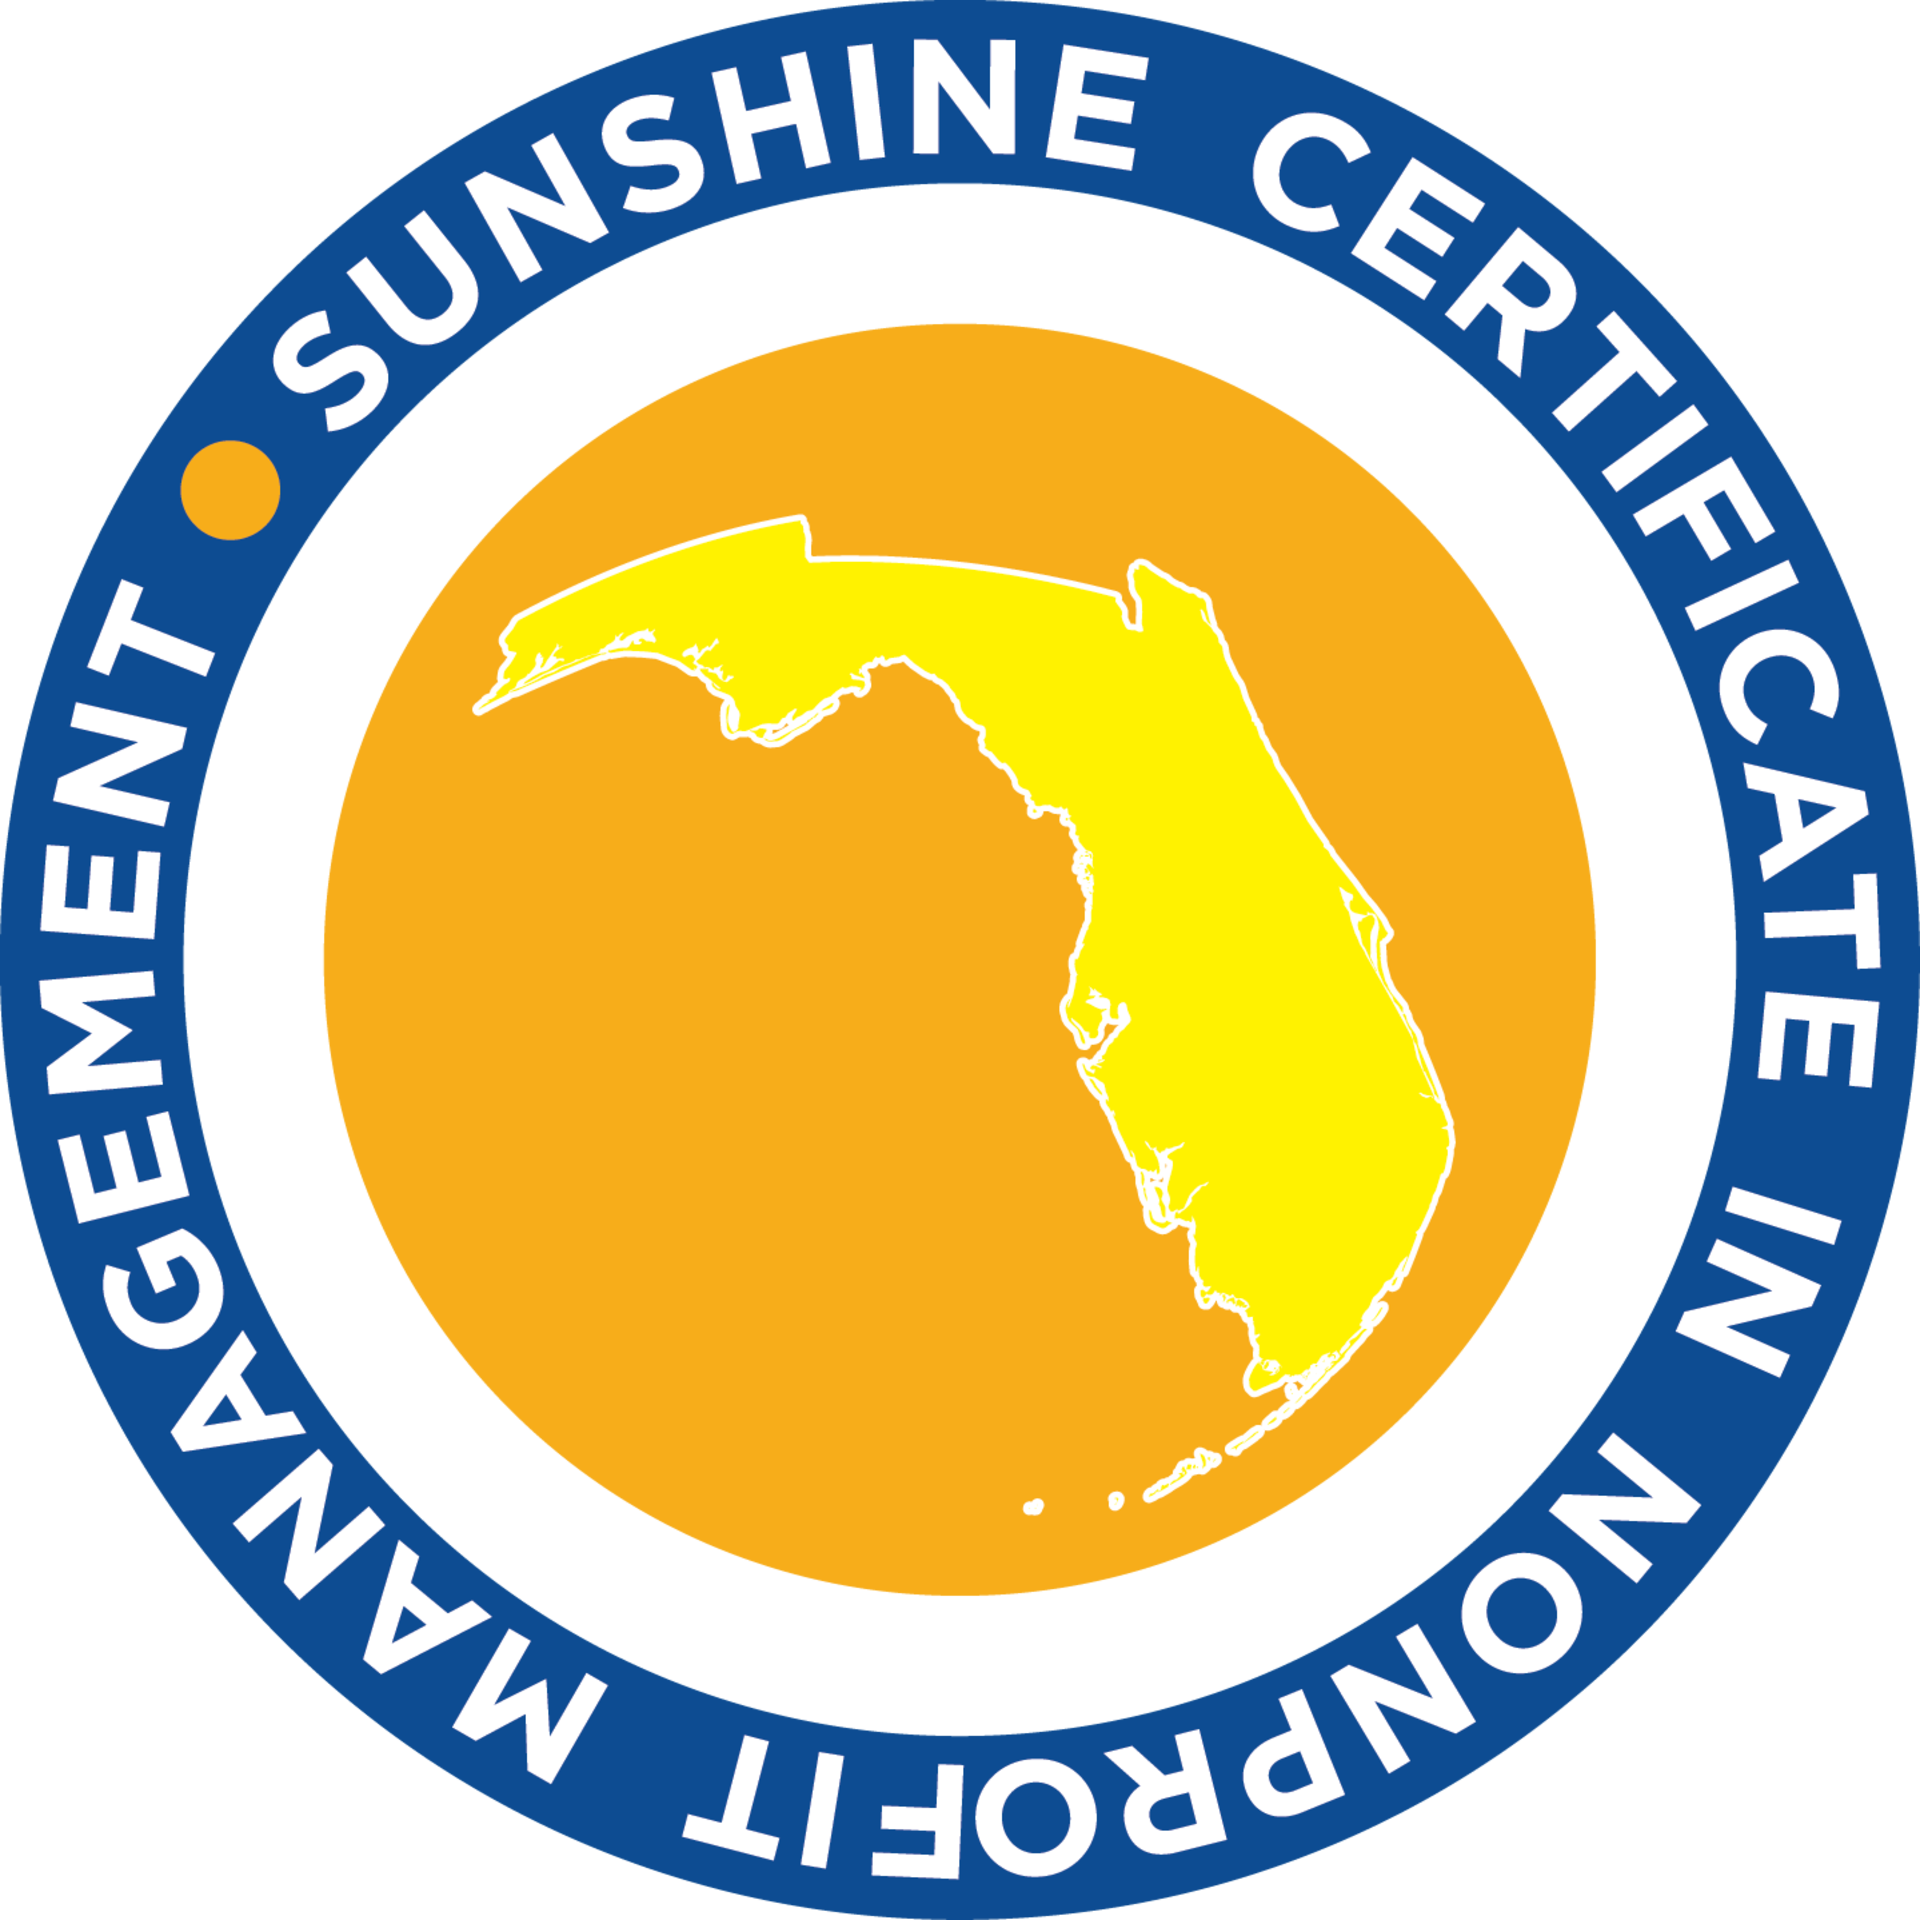  Florida Nonprofits’ Strategic Thinking Class of the Sunshine Certificate in.....